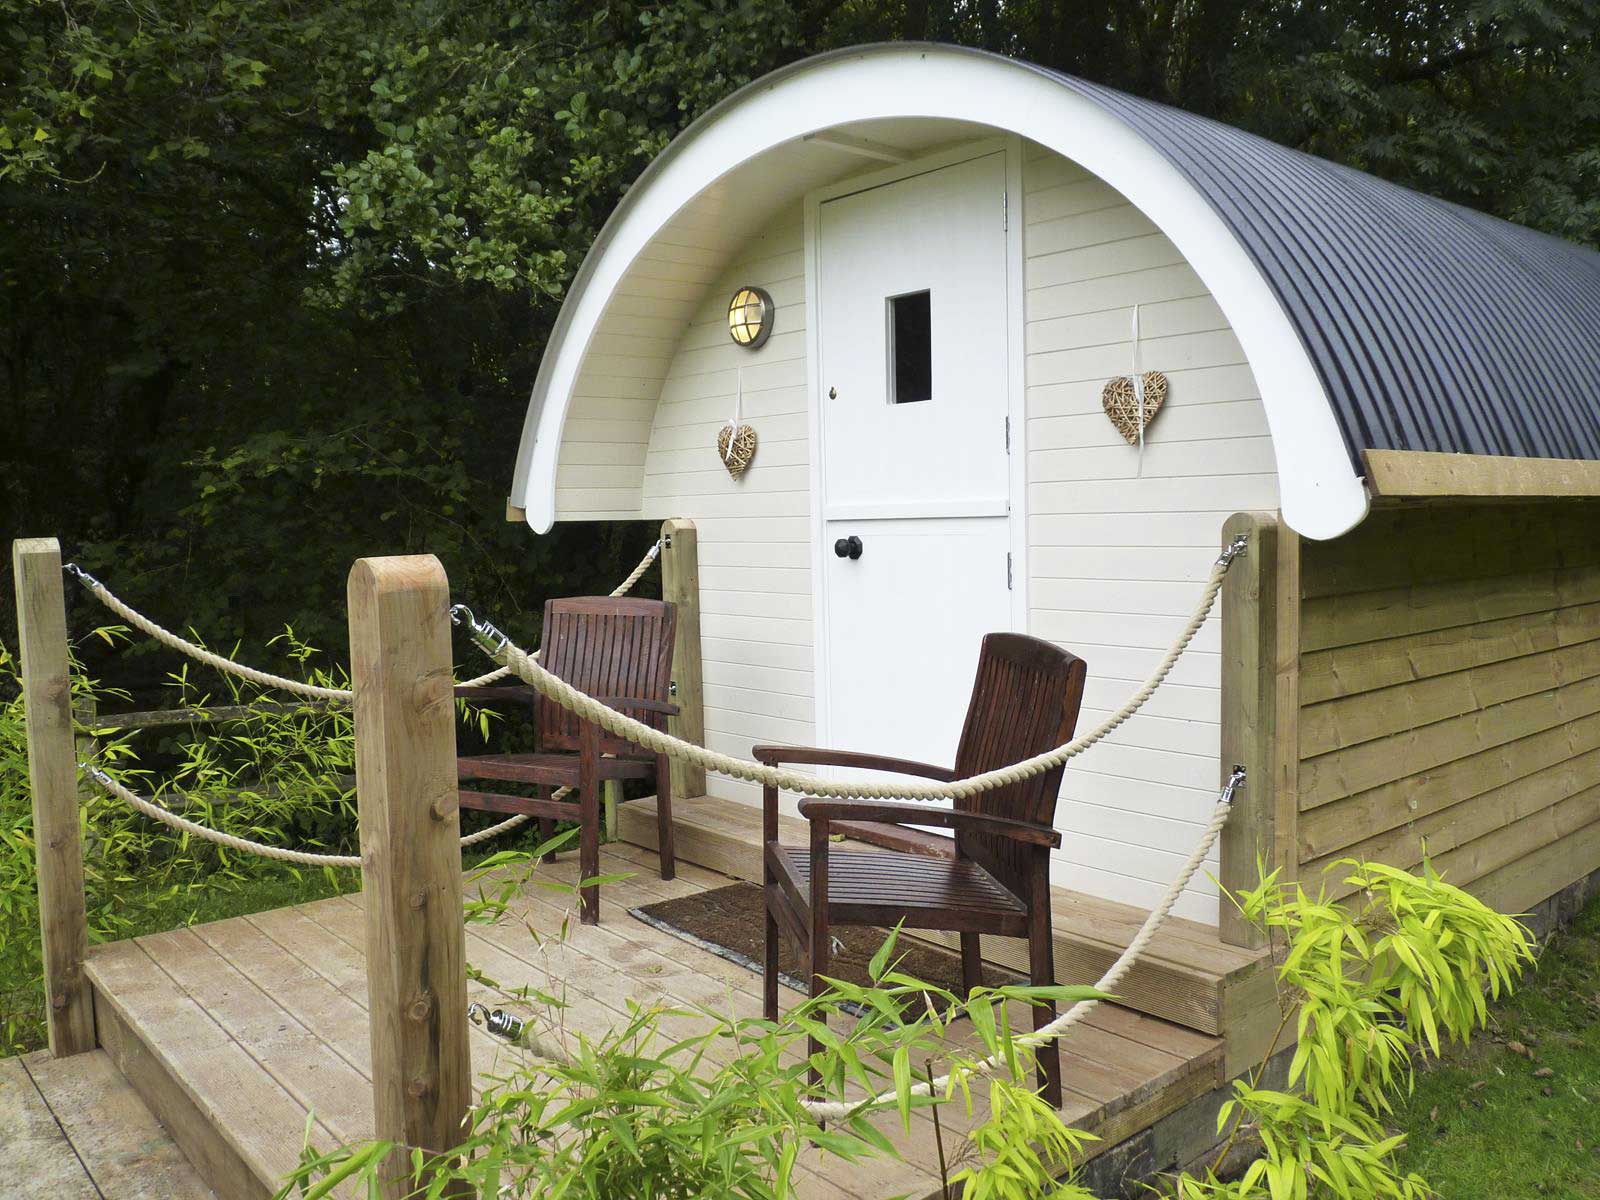 A pod made by Pig Pod in Tiverton can also be used as a home office